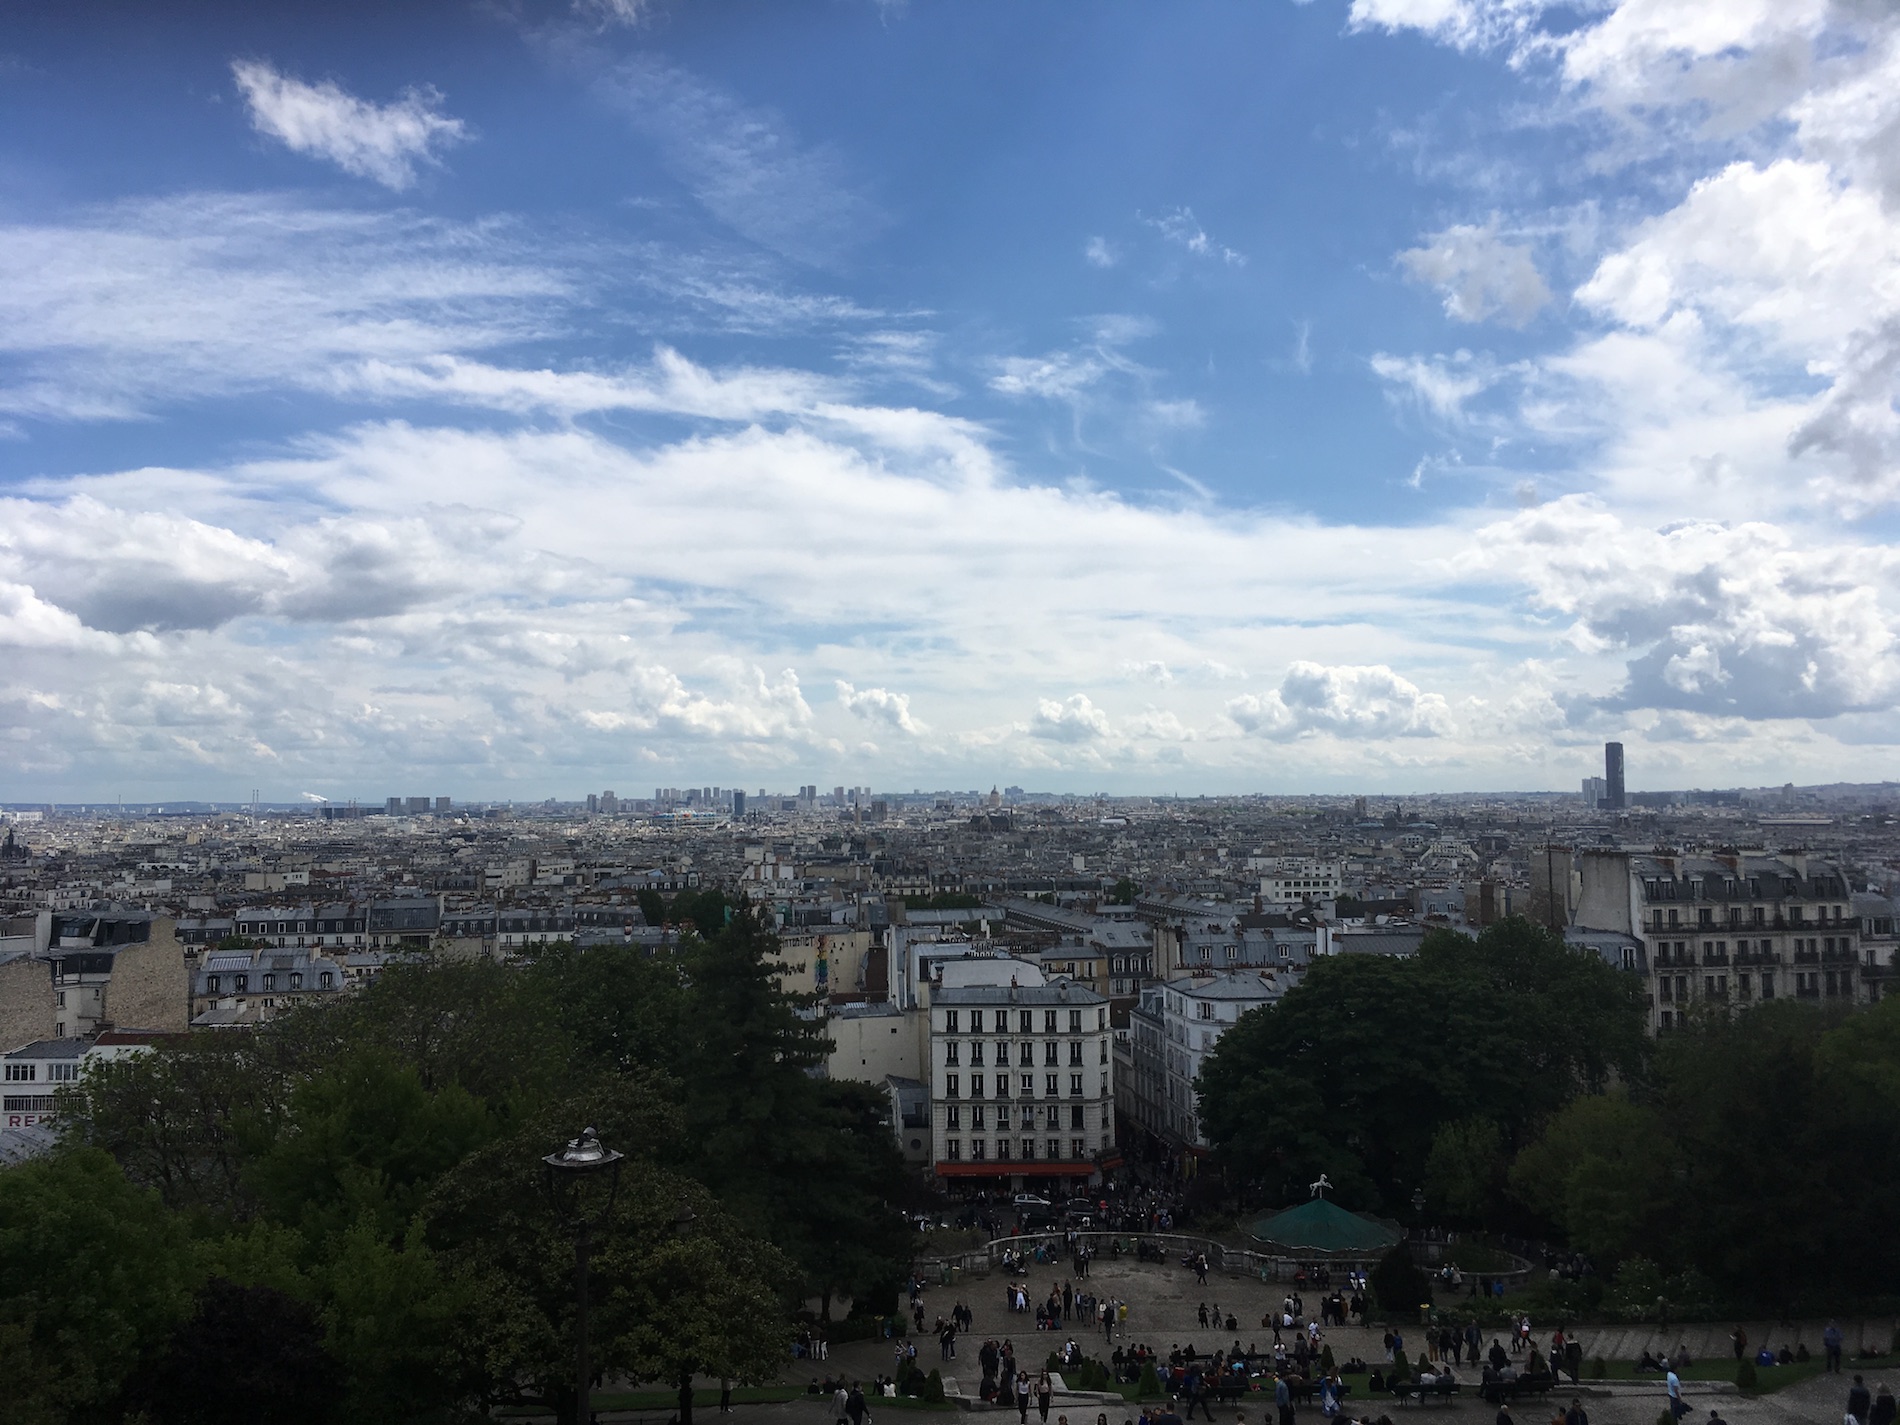 The city of paris from a raised position, photo by Hoverbear